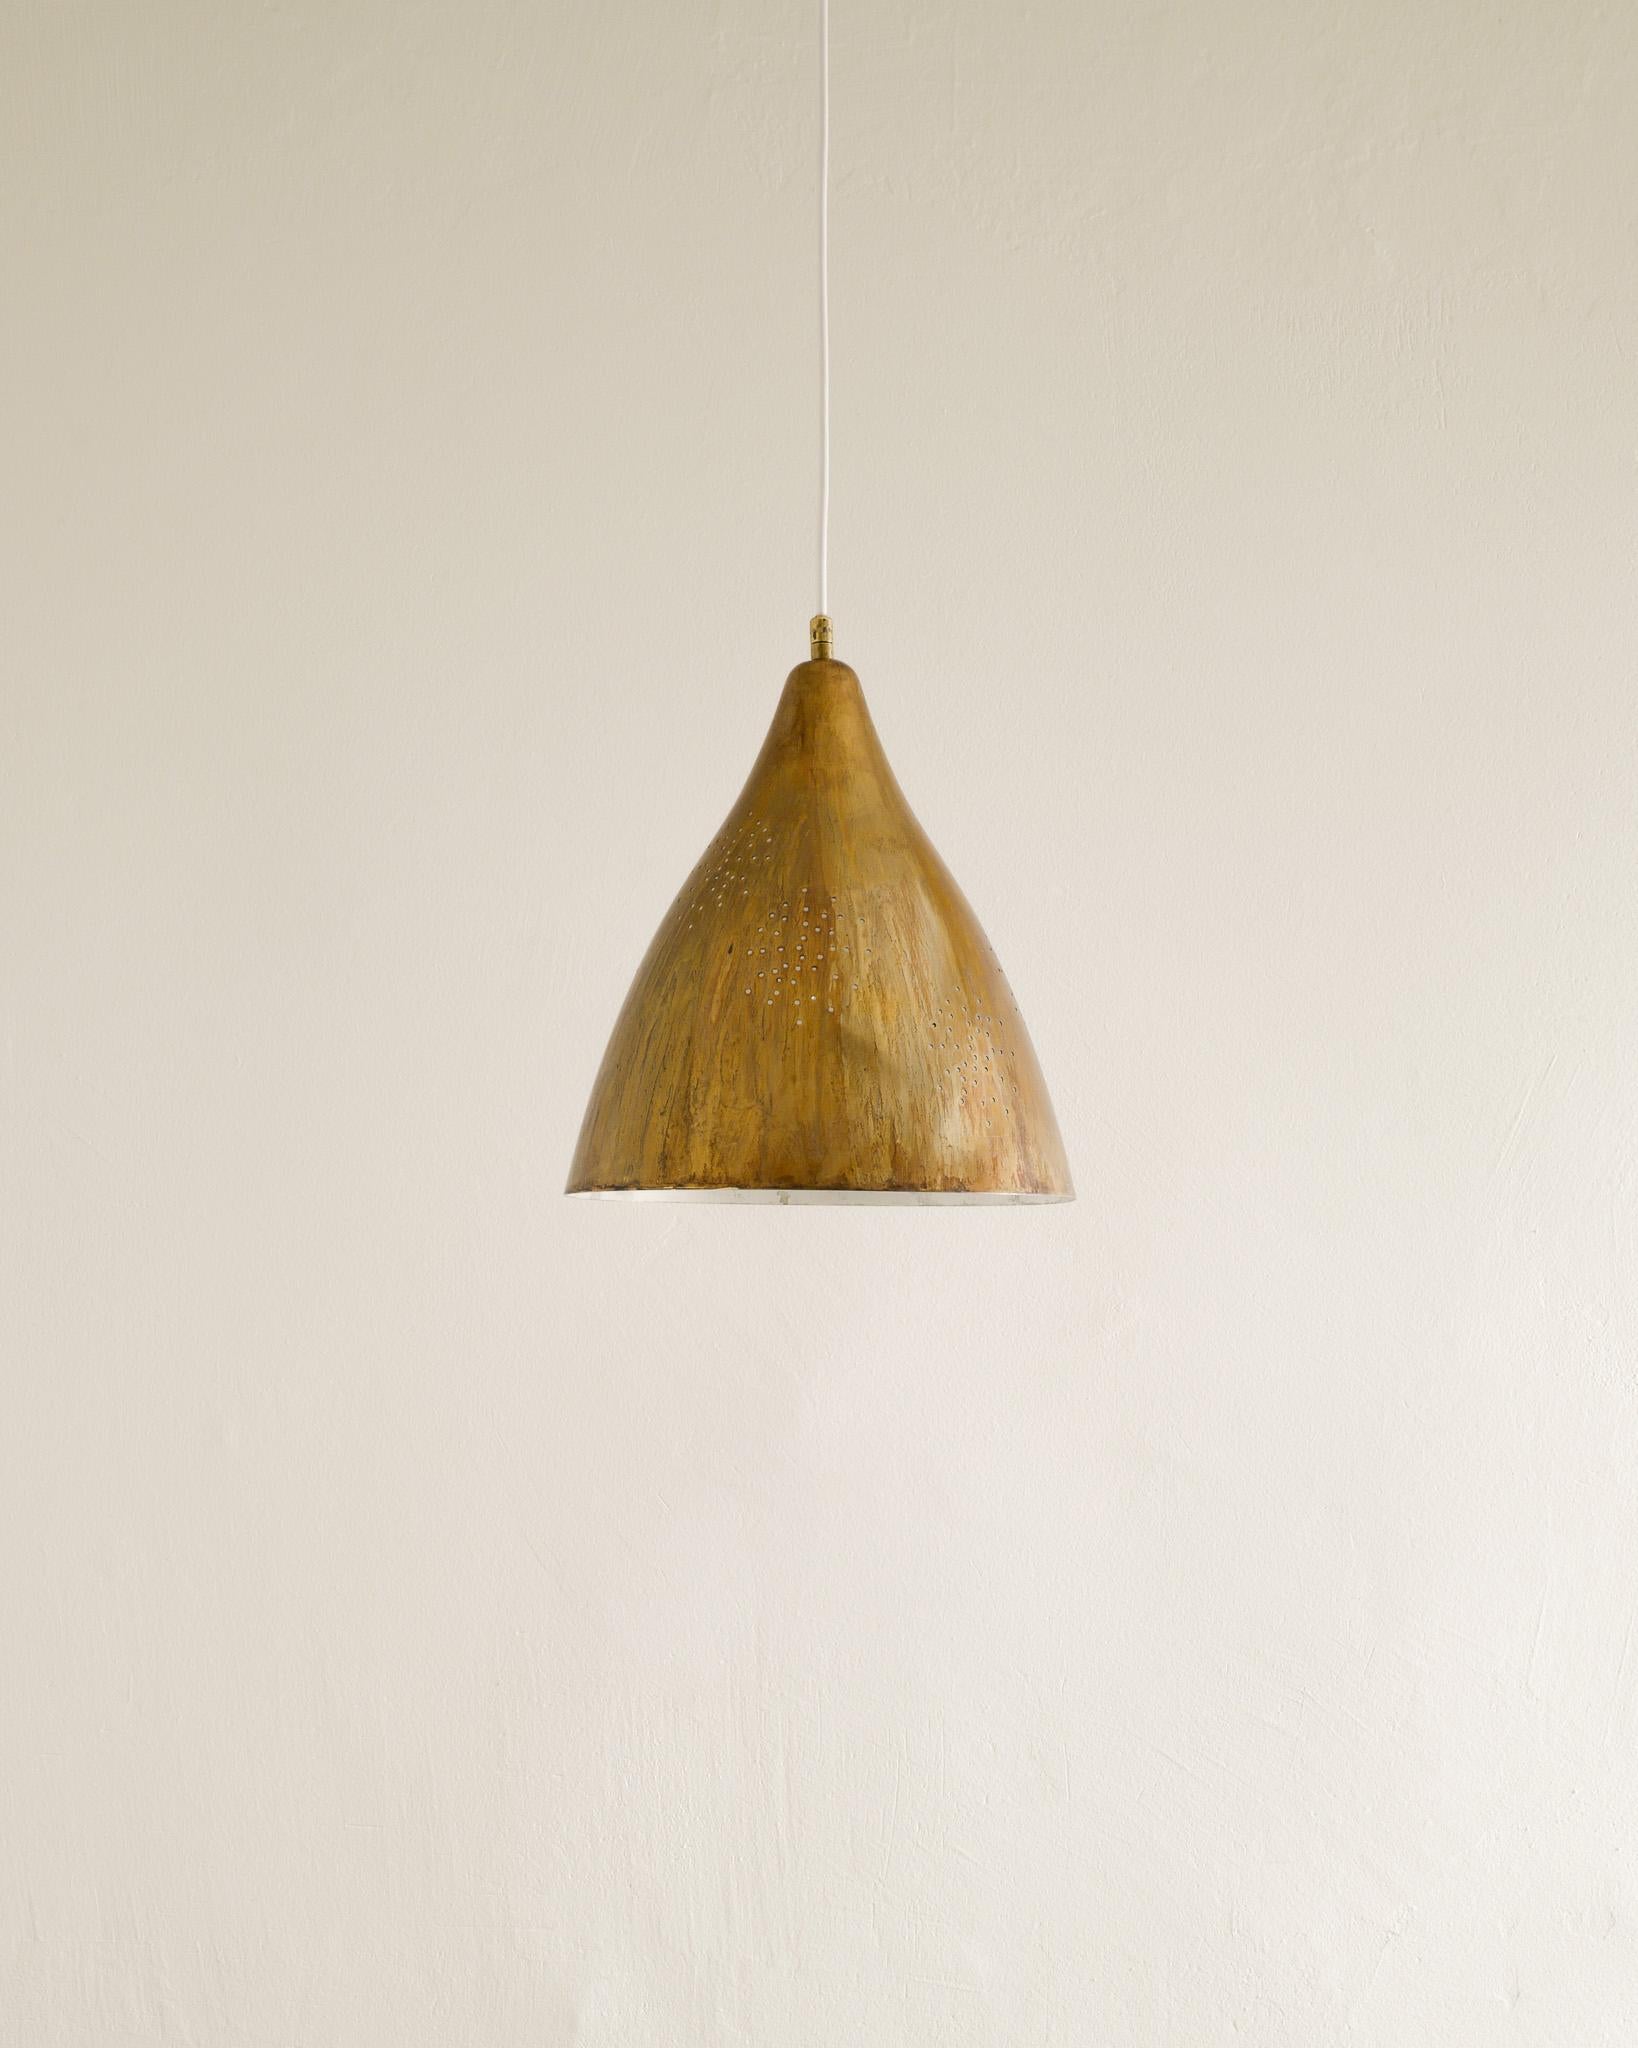 Very rare round mid century brass ceiling pendant by Lisa Johansson-Papé produced by Stockmann Orno Oy in Finland, 1940s. In good original condition with great patina. Stamped Orno on the shade. 

Dimensions: H: 30 cm / 11.80